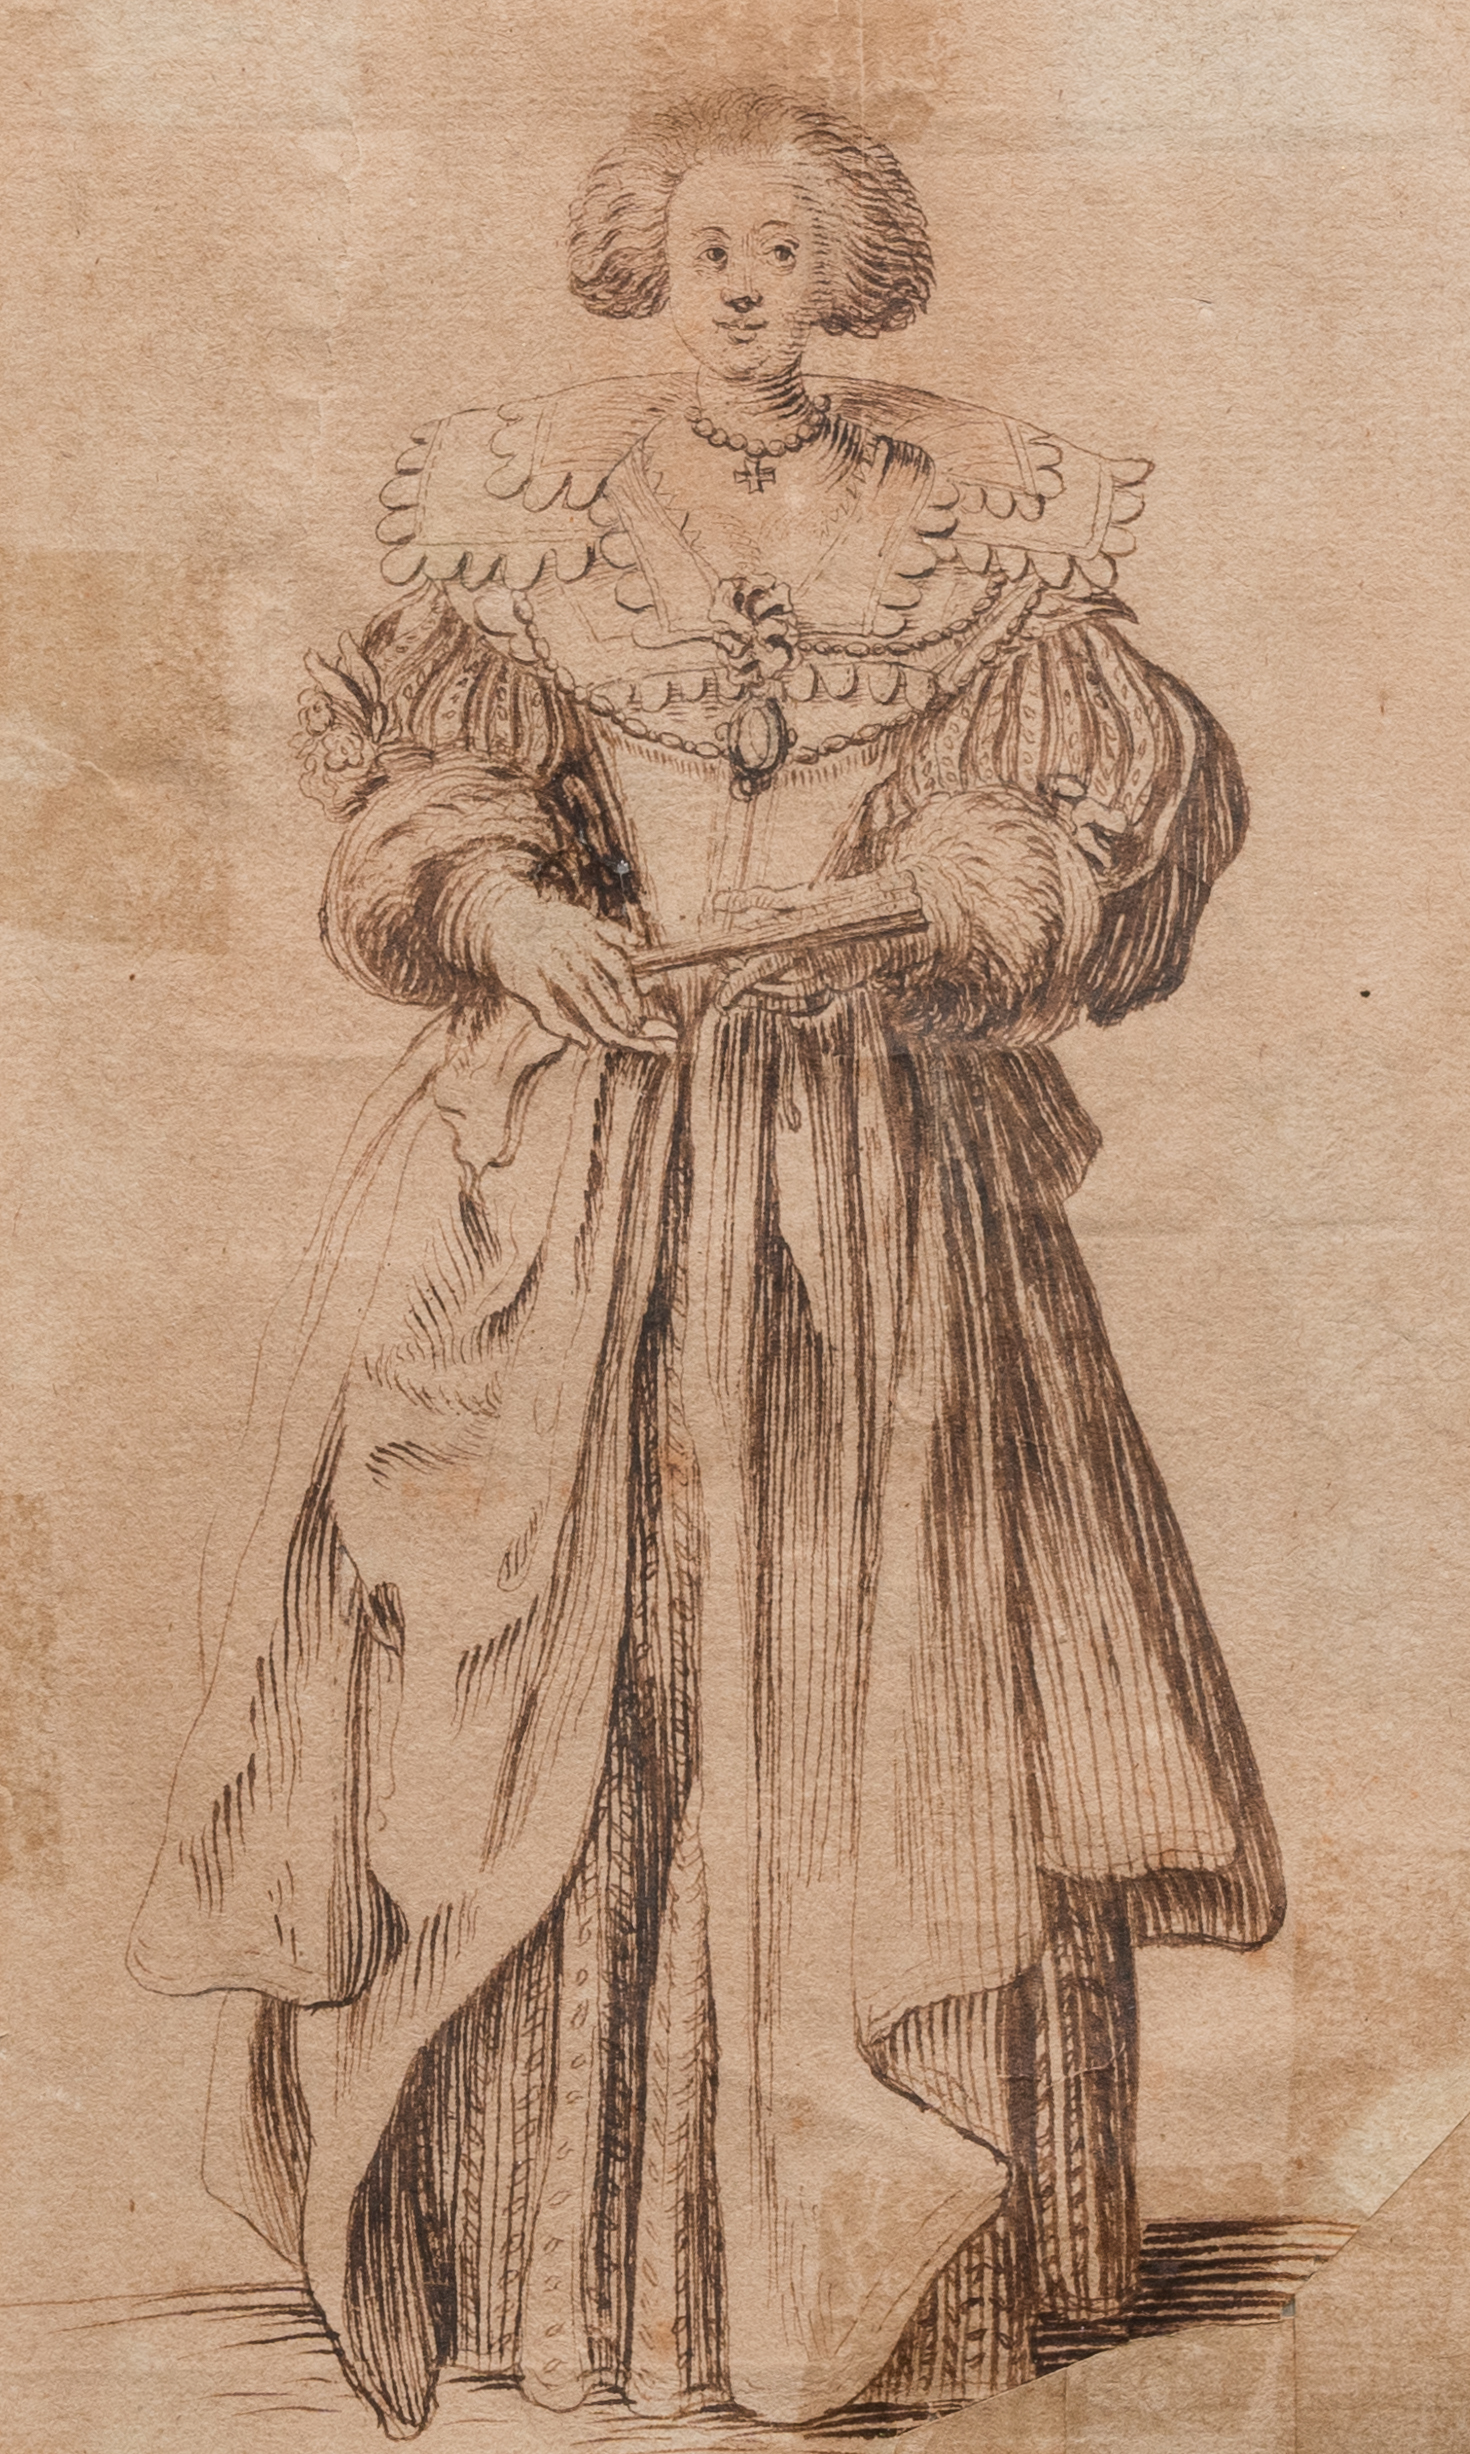 Jacques Callot (1592-1635): 'Noble lady holding a fan', study for an engraving from the series 'La N